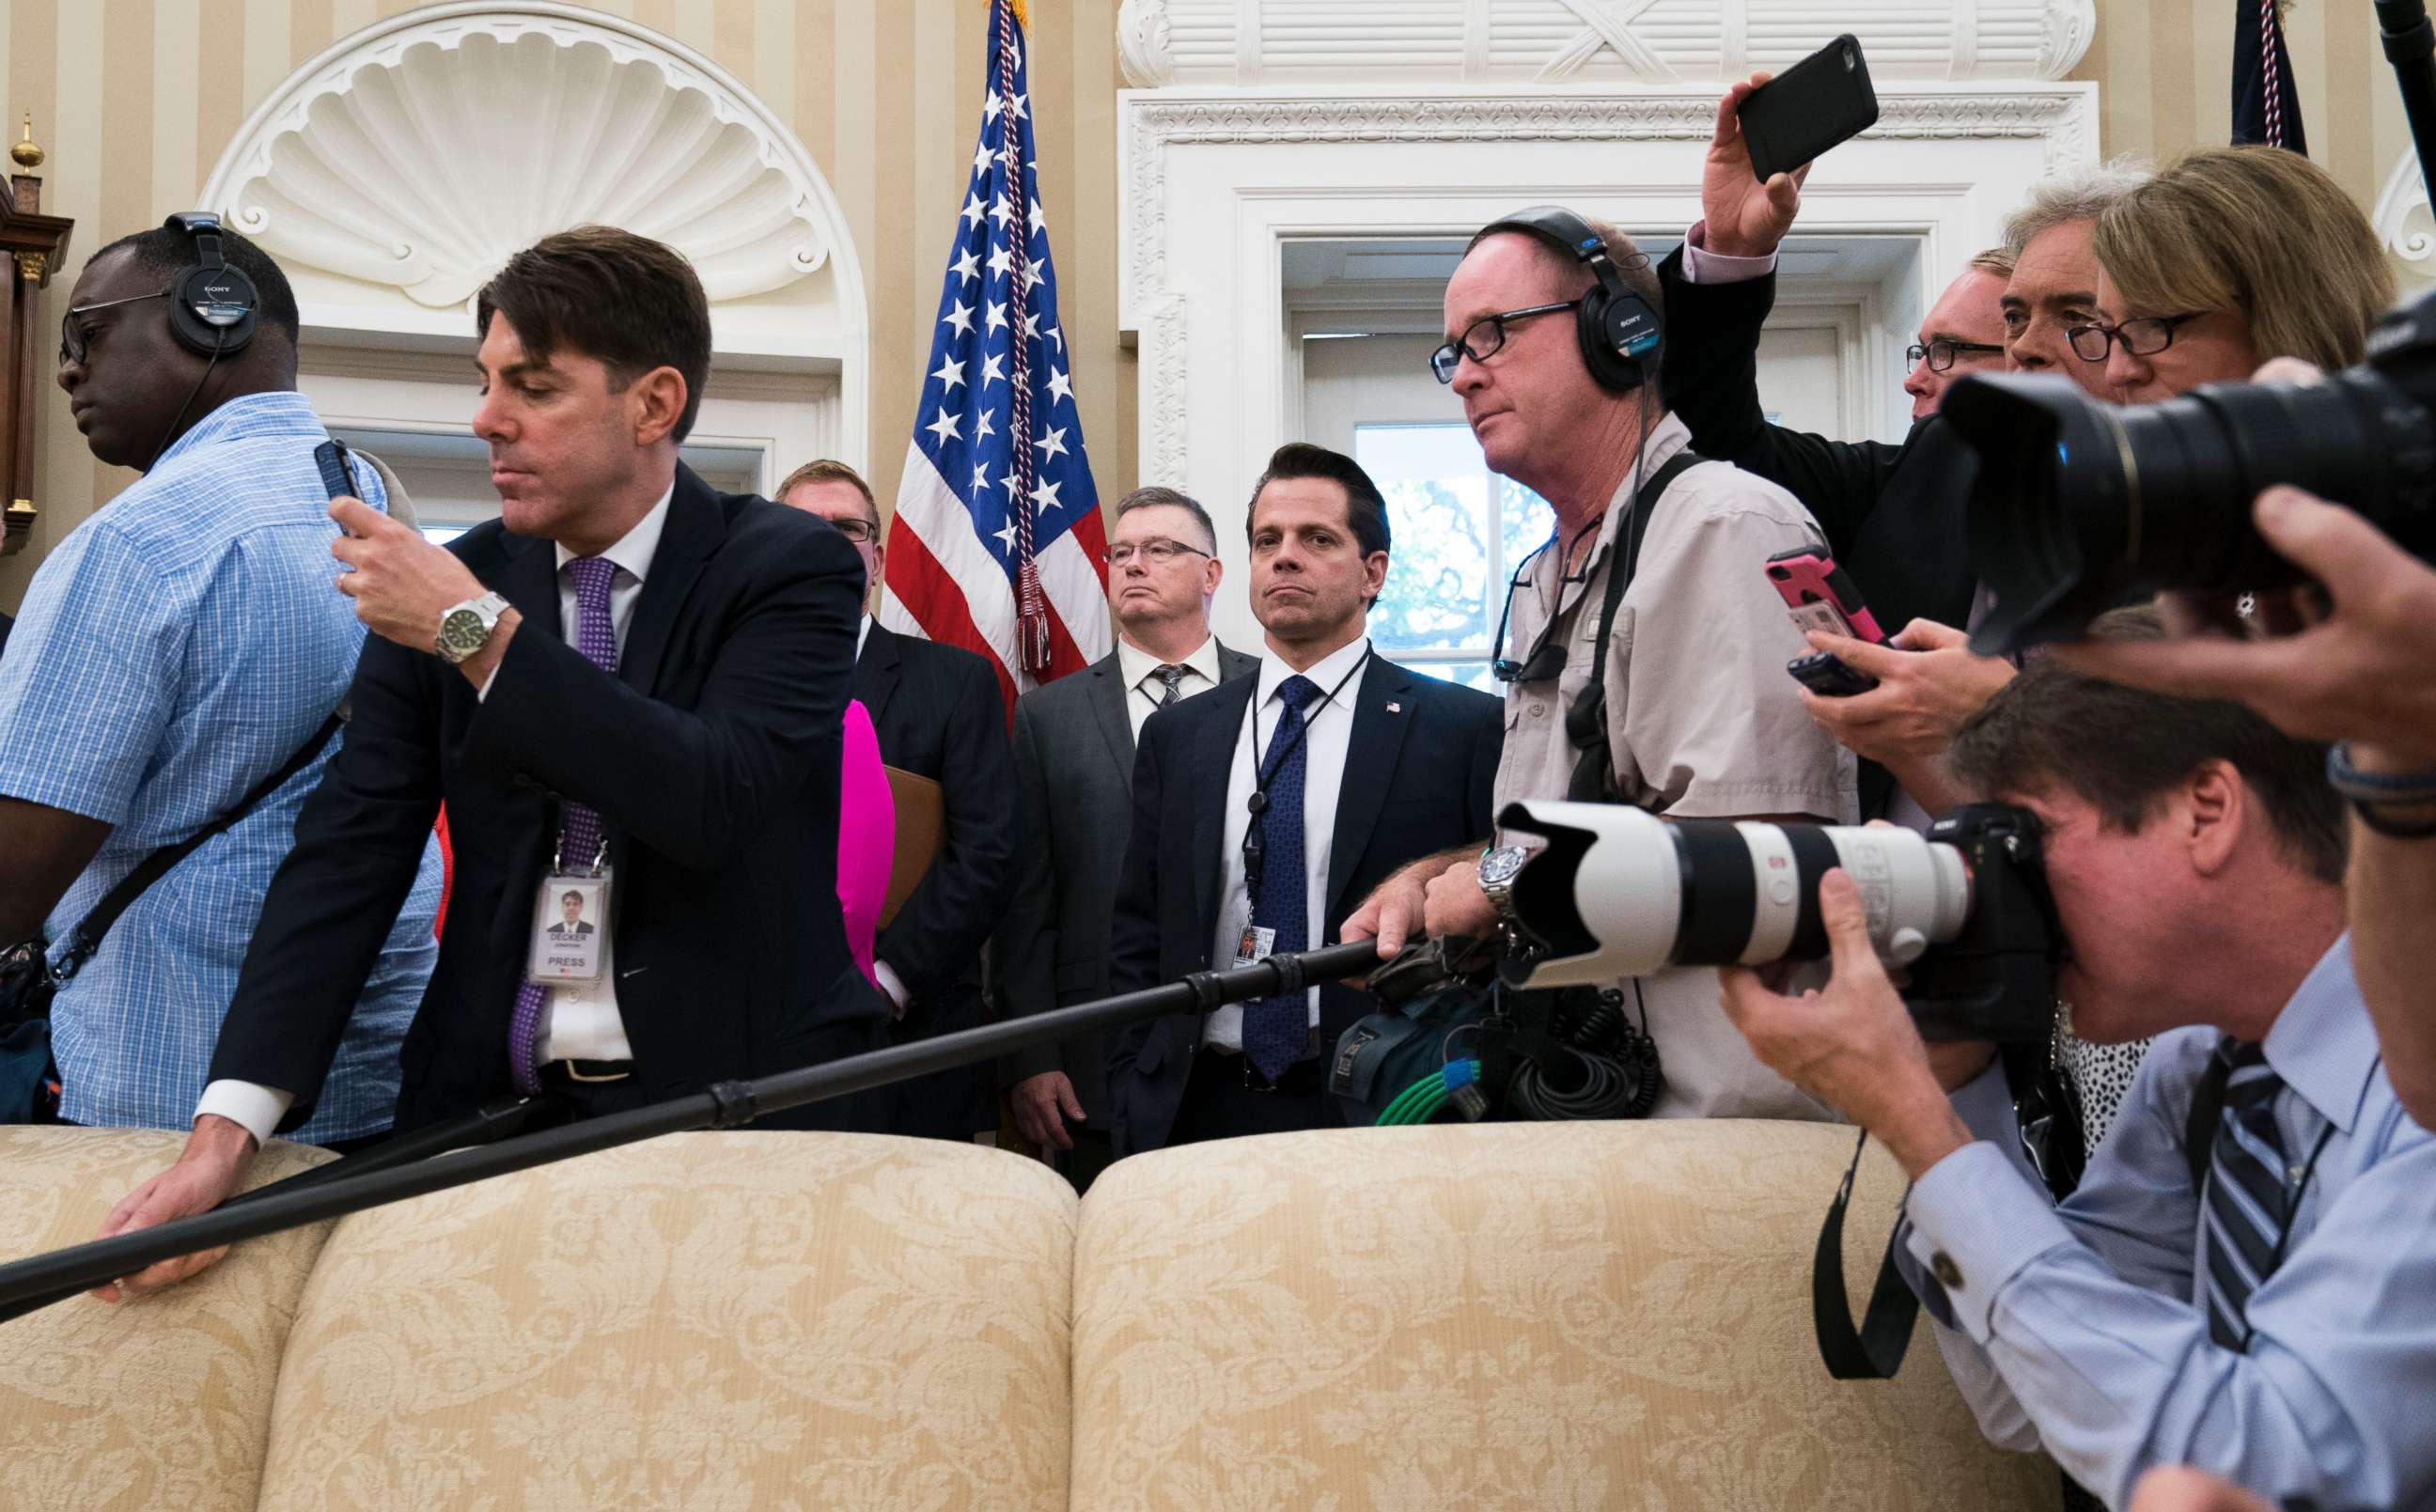 PHOTO: Outgoing White House Communications Director Anthony Scaramucci, surrounded by reporters, is pictured while President Donald Trump meets with John Kelly, his new Chief of Staff, in the Oval office of the White House, July 31, 2017.